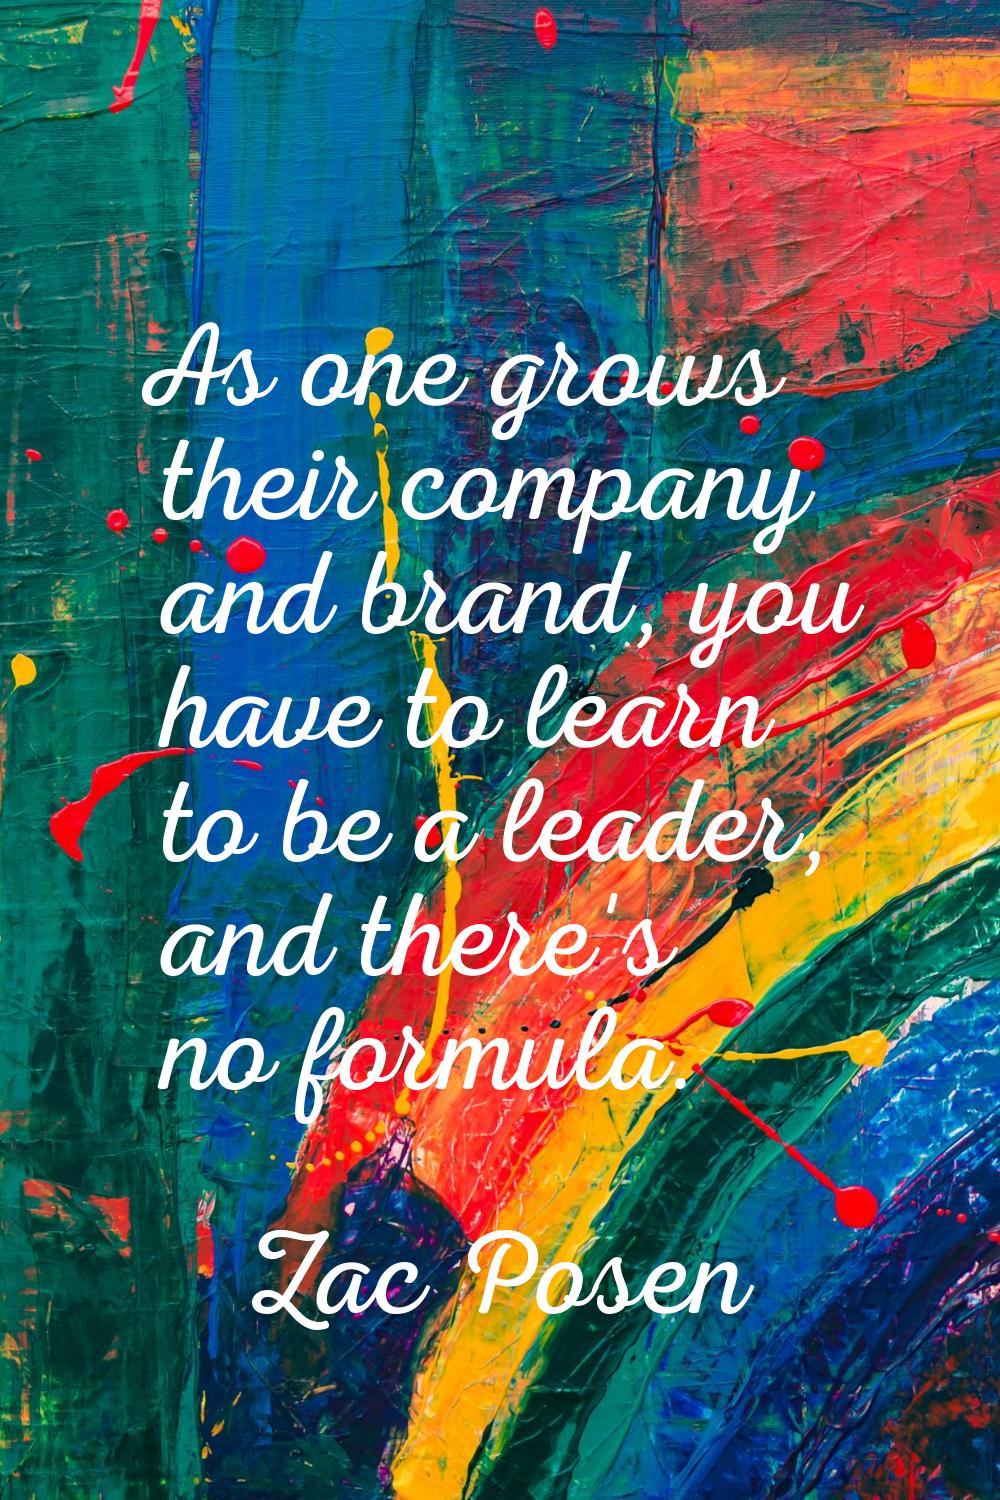 As one grows their company and brand, you have to learn to be a leader, and there's no formula.